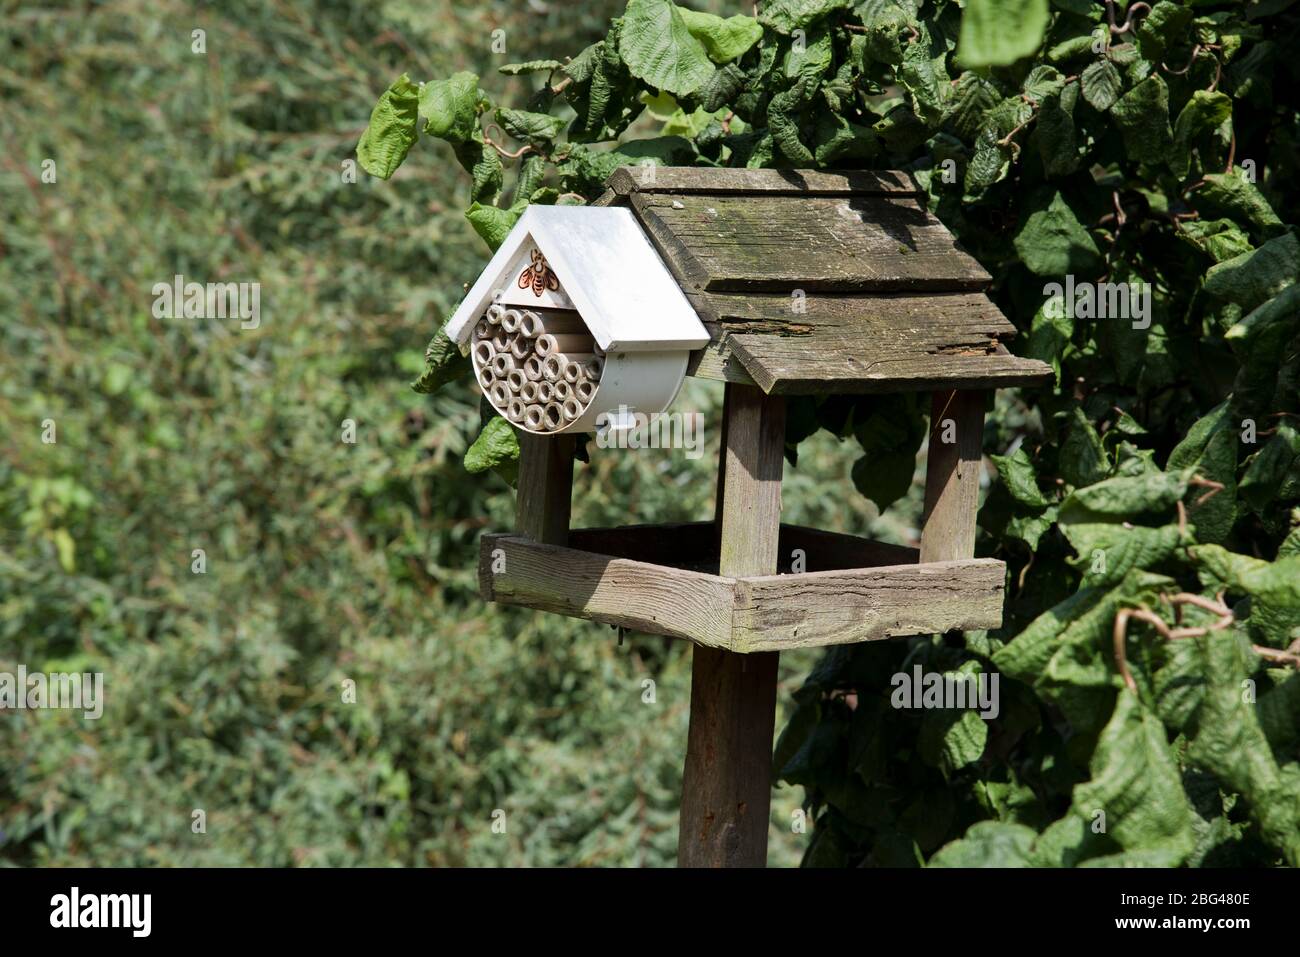 A rustic bird table with a bee nesting box attached Stock Photo